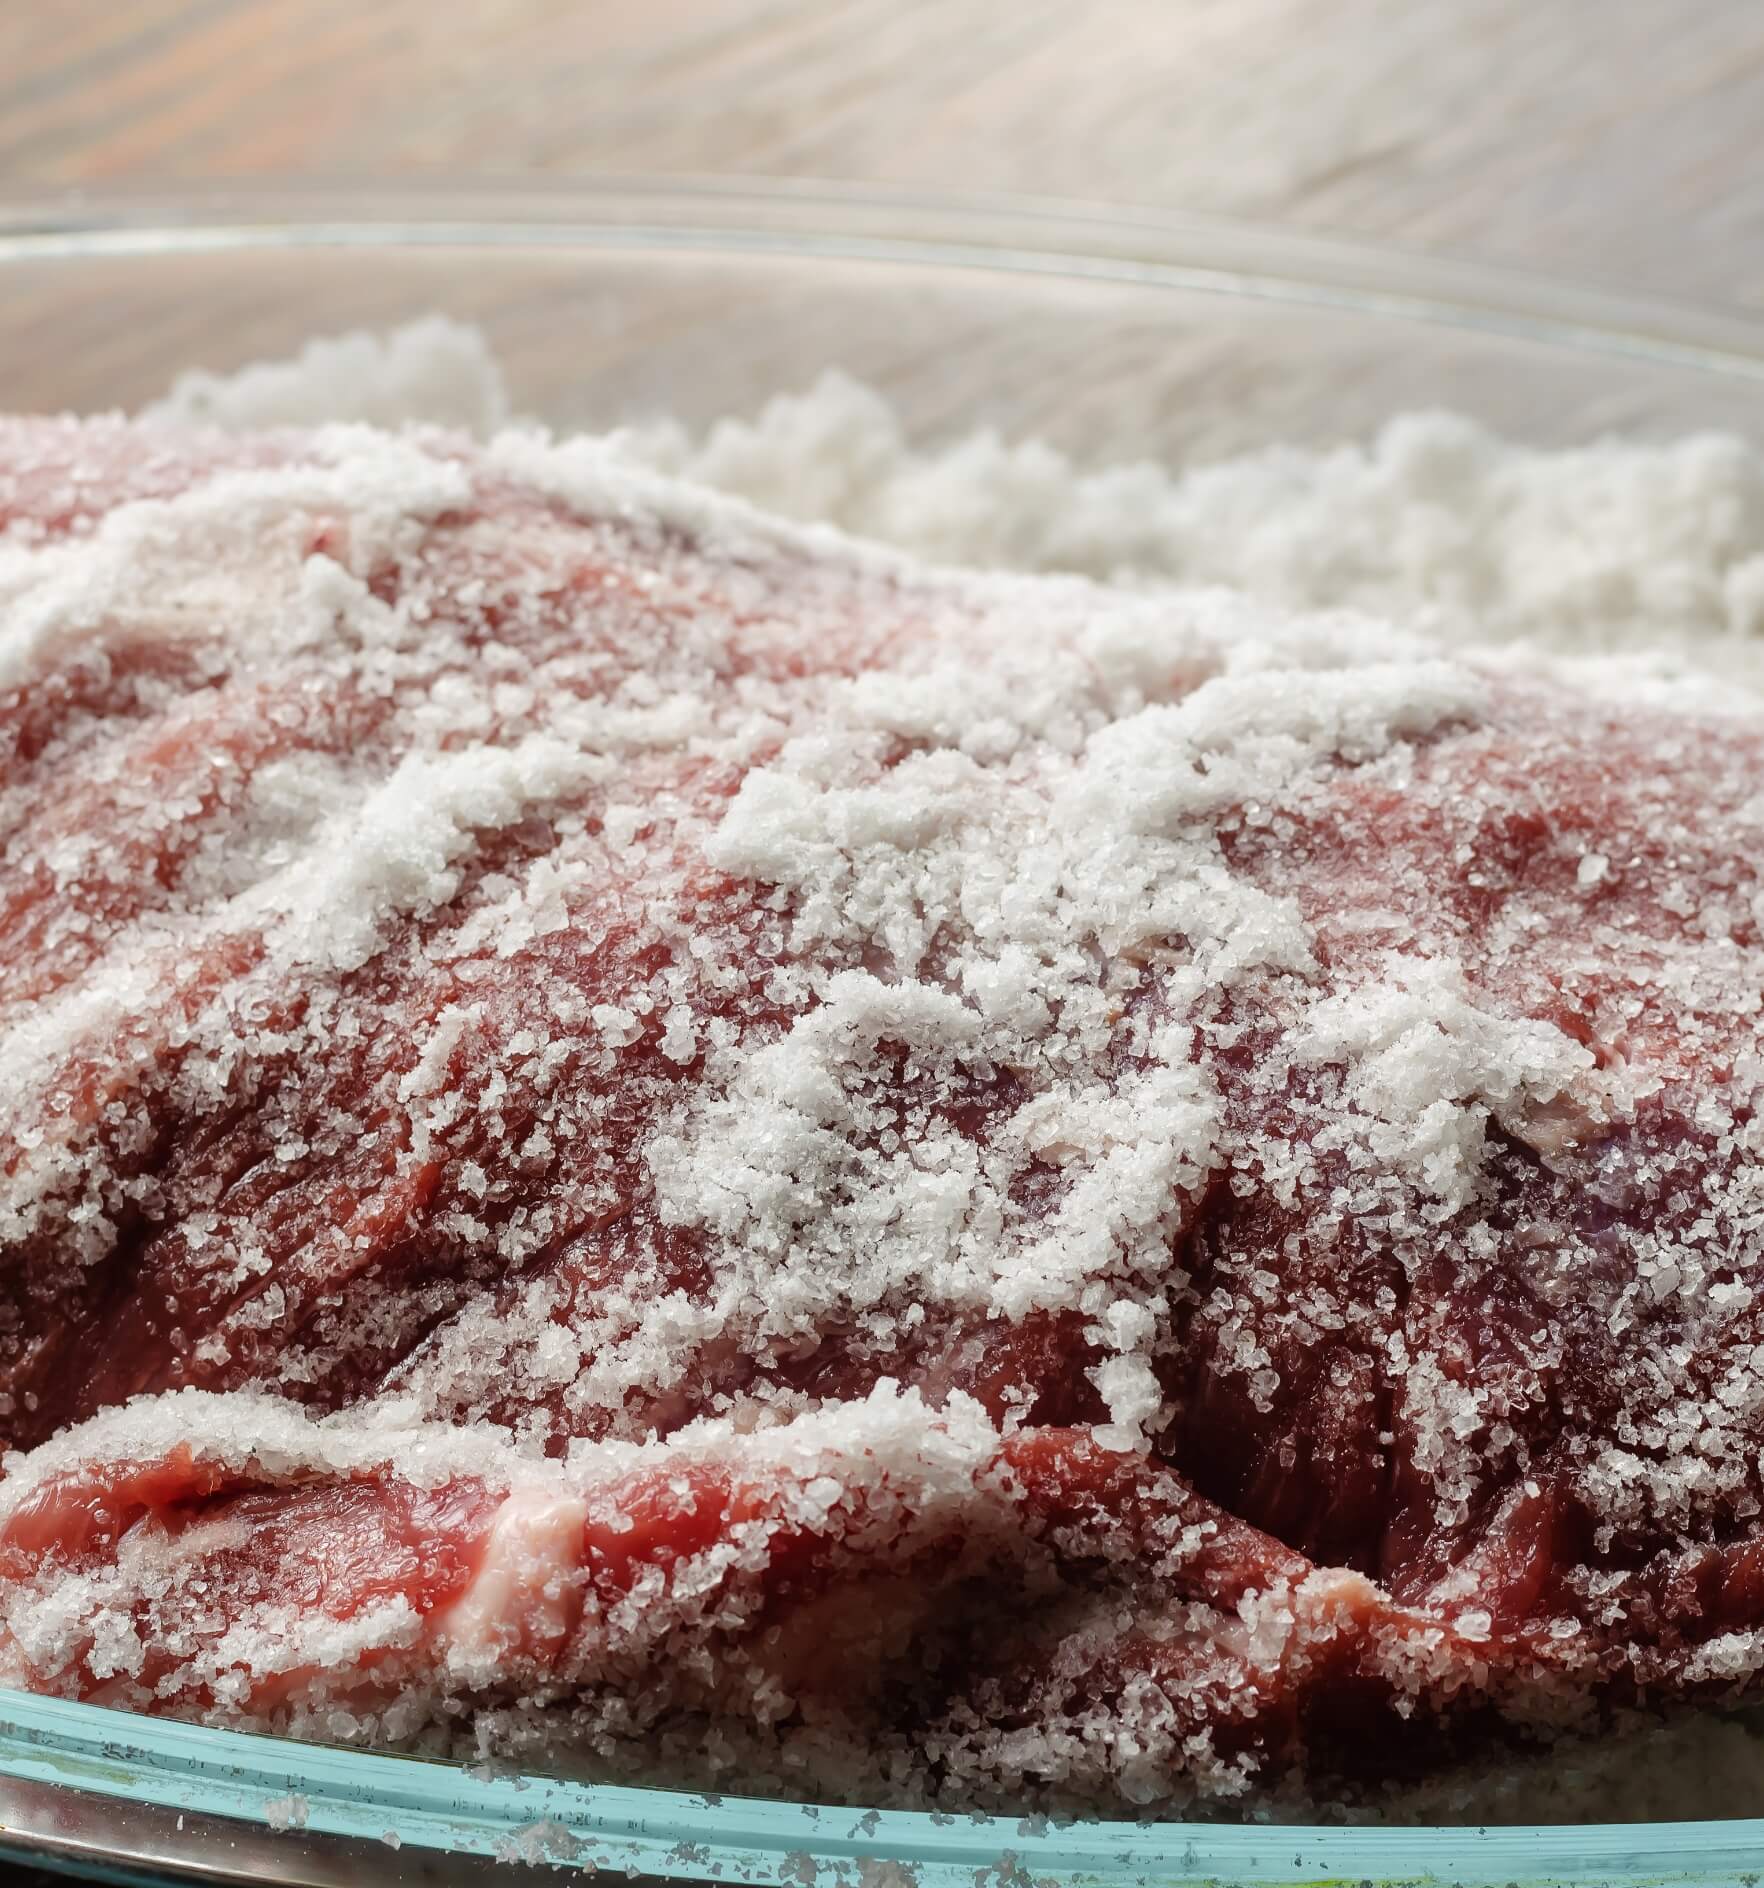 Image showing raw pork meat covered with salt in glass bowl